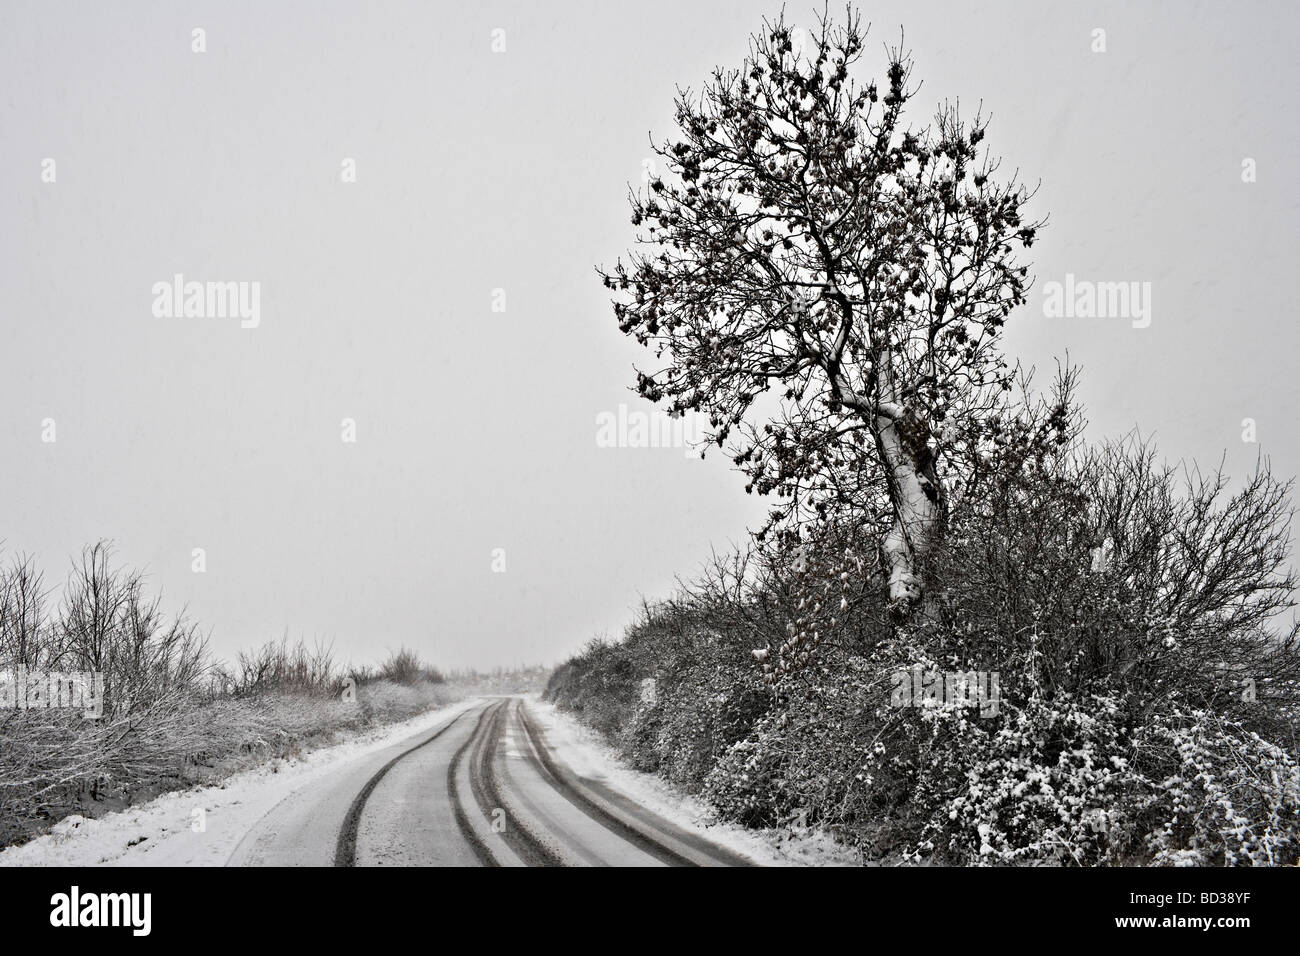 Winding road covered in snow Stock Photo